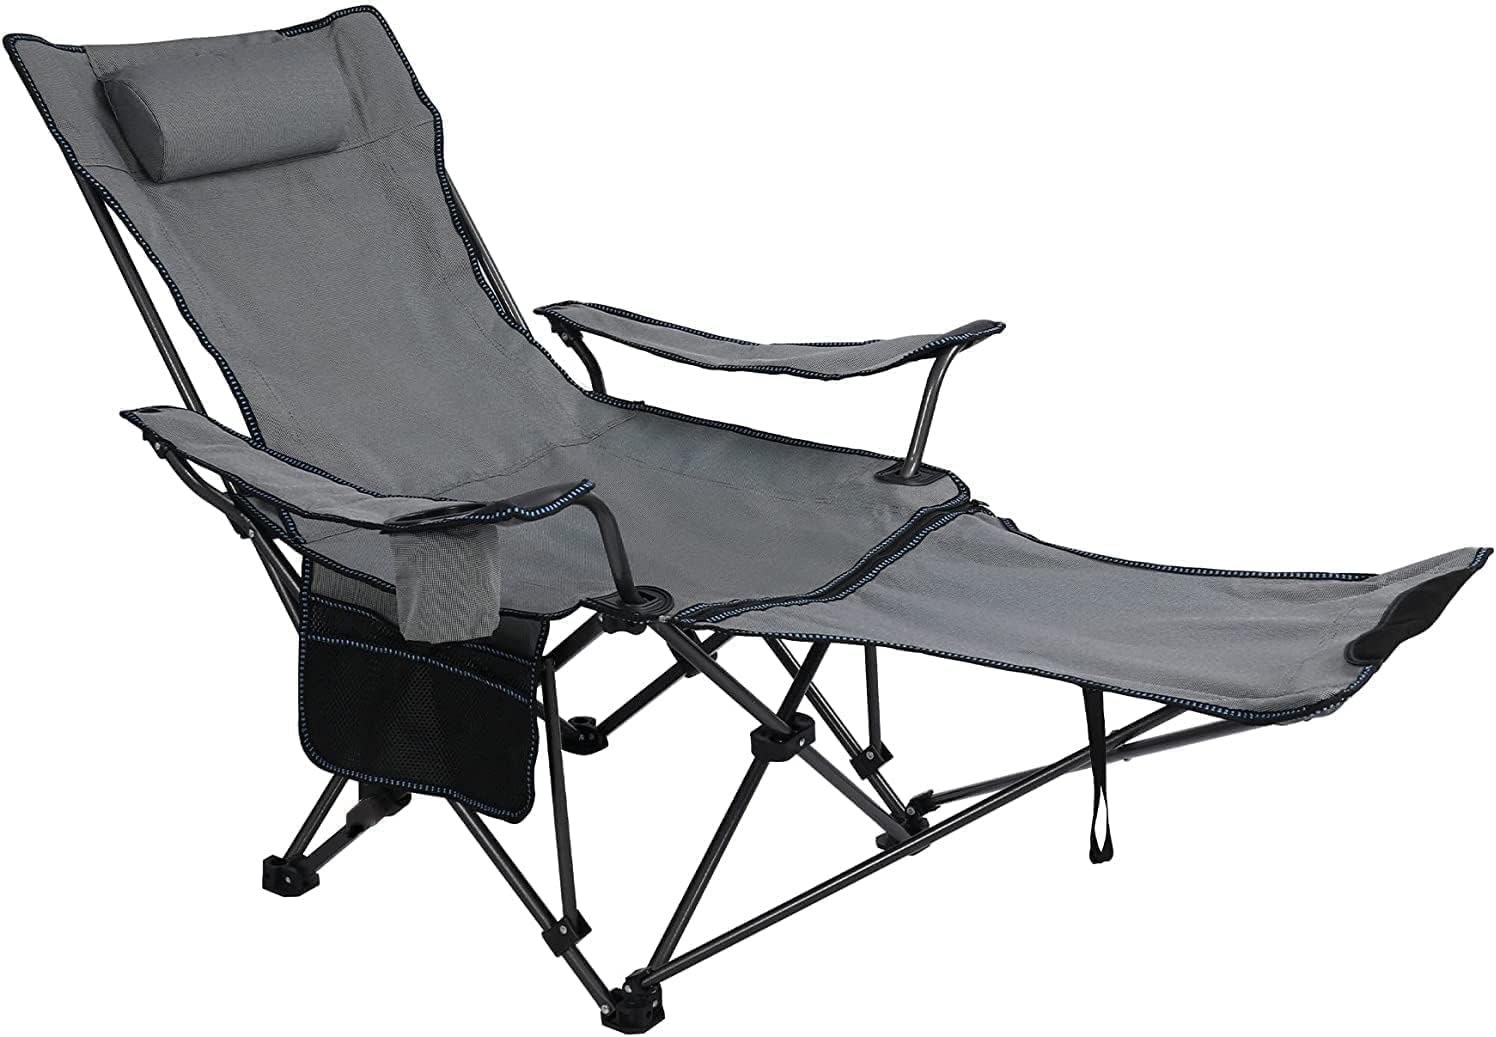 Camping Chair Foldable Beach Chairs Adjustable High Back Lawn Chair Re